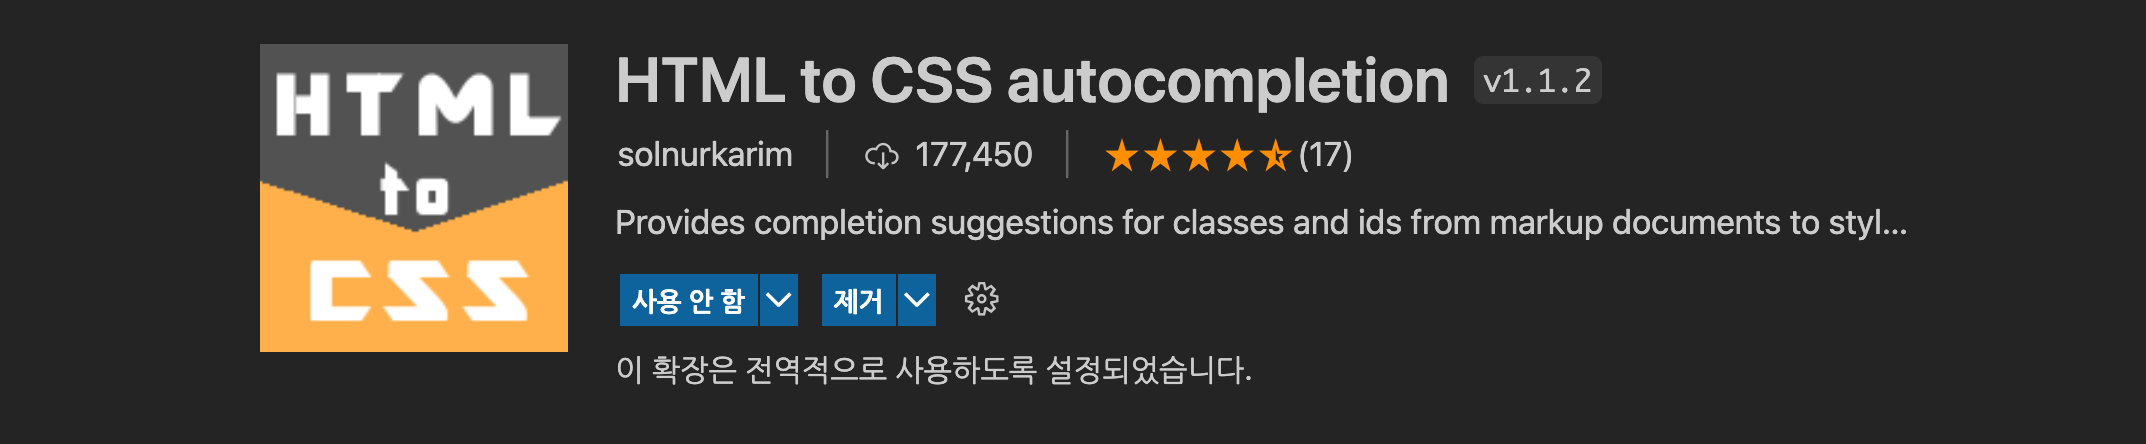 HTML_to_CSS_autocompletion